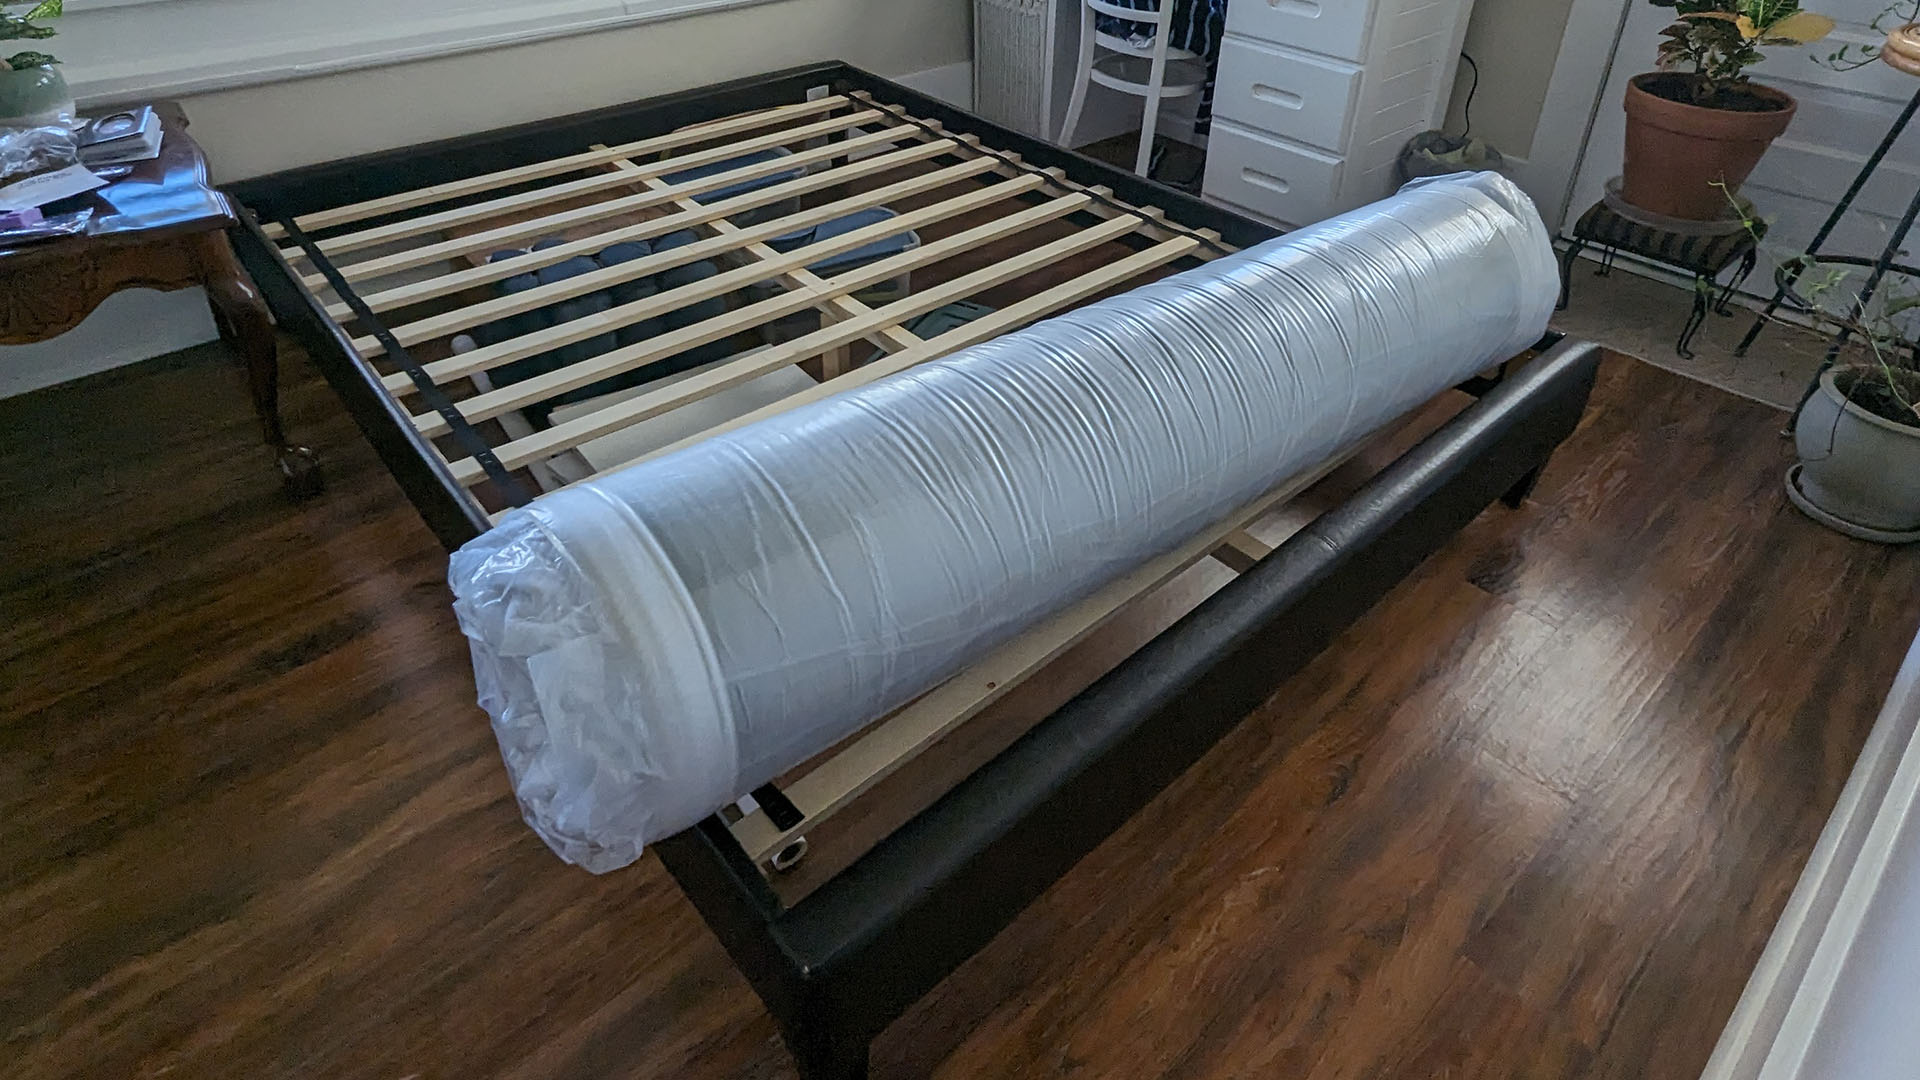 Purple NewDay mattress vacuum-packed and rolled